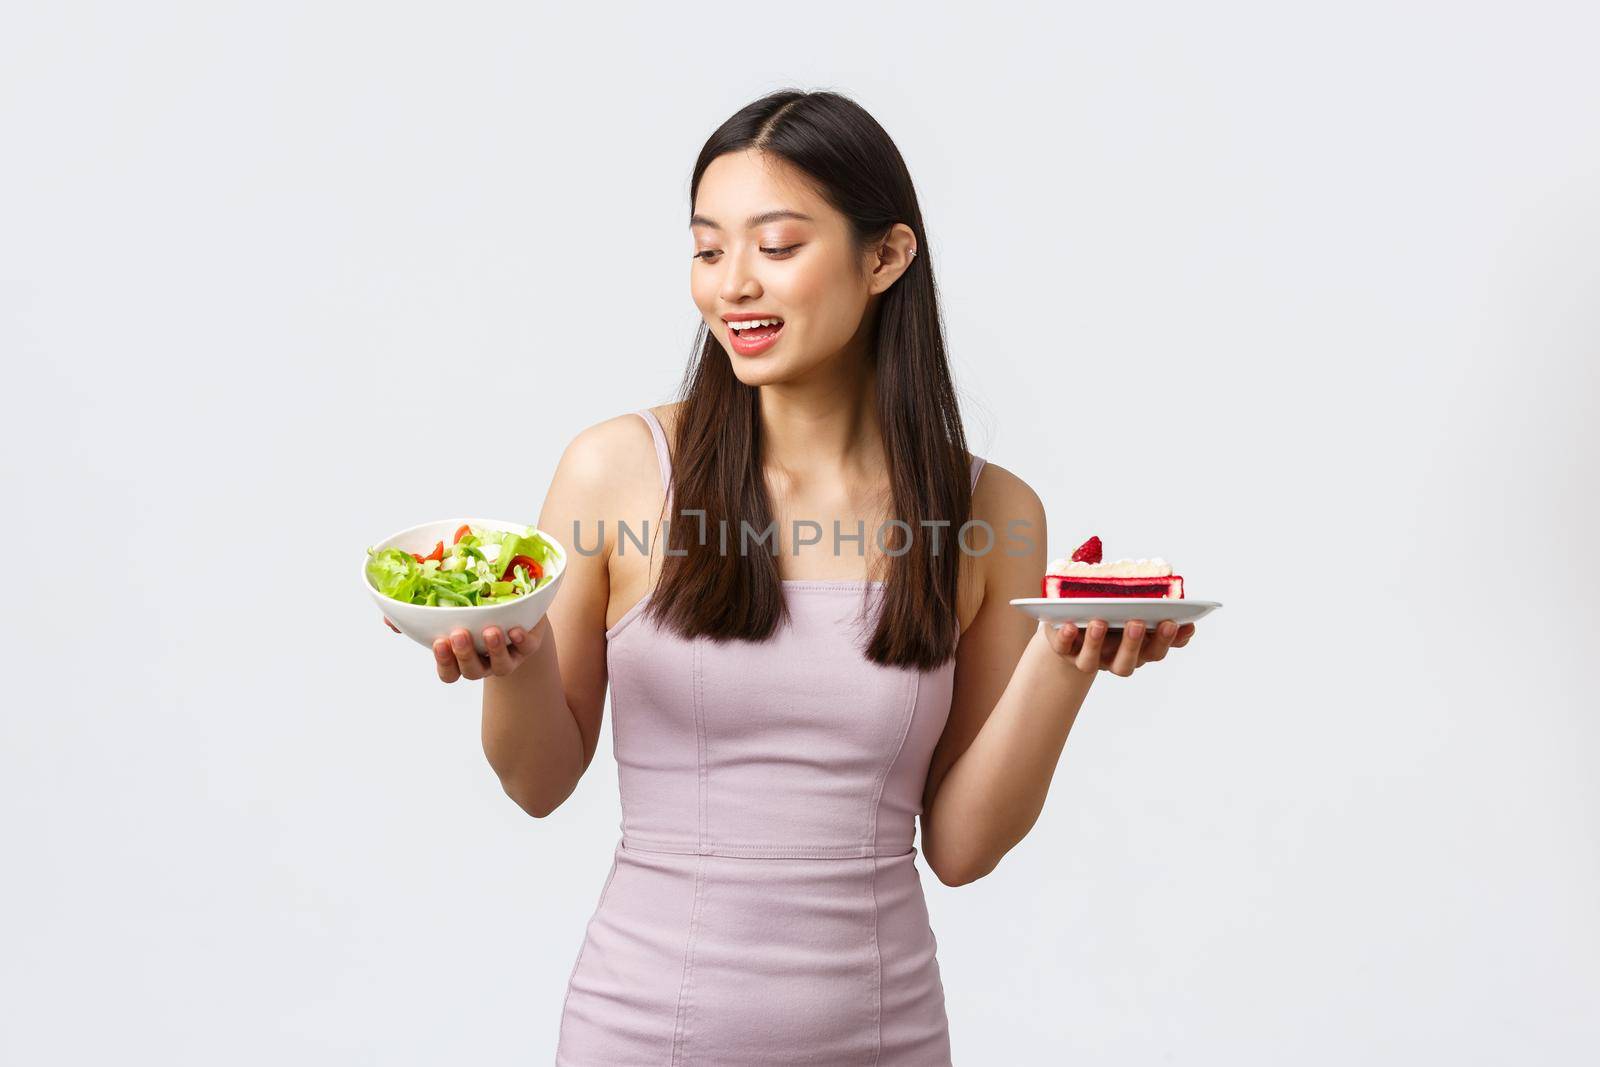 Healthy lifestyle, leisure and food concept. Beautiful slim asian girl in evening party dress, looking pleased at bowl with salad and holding piece of cake, standing white background.